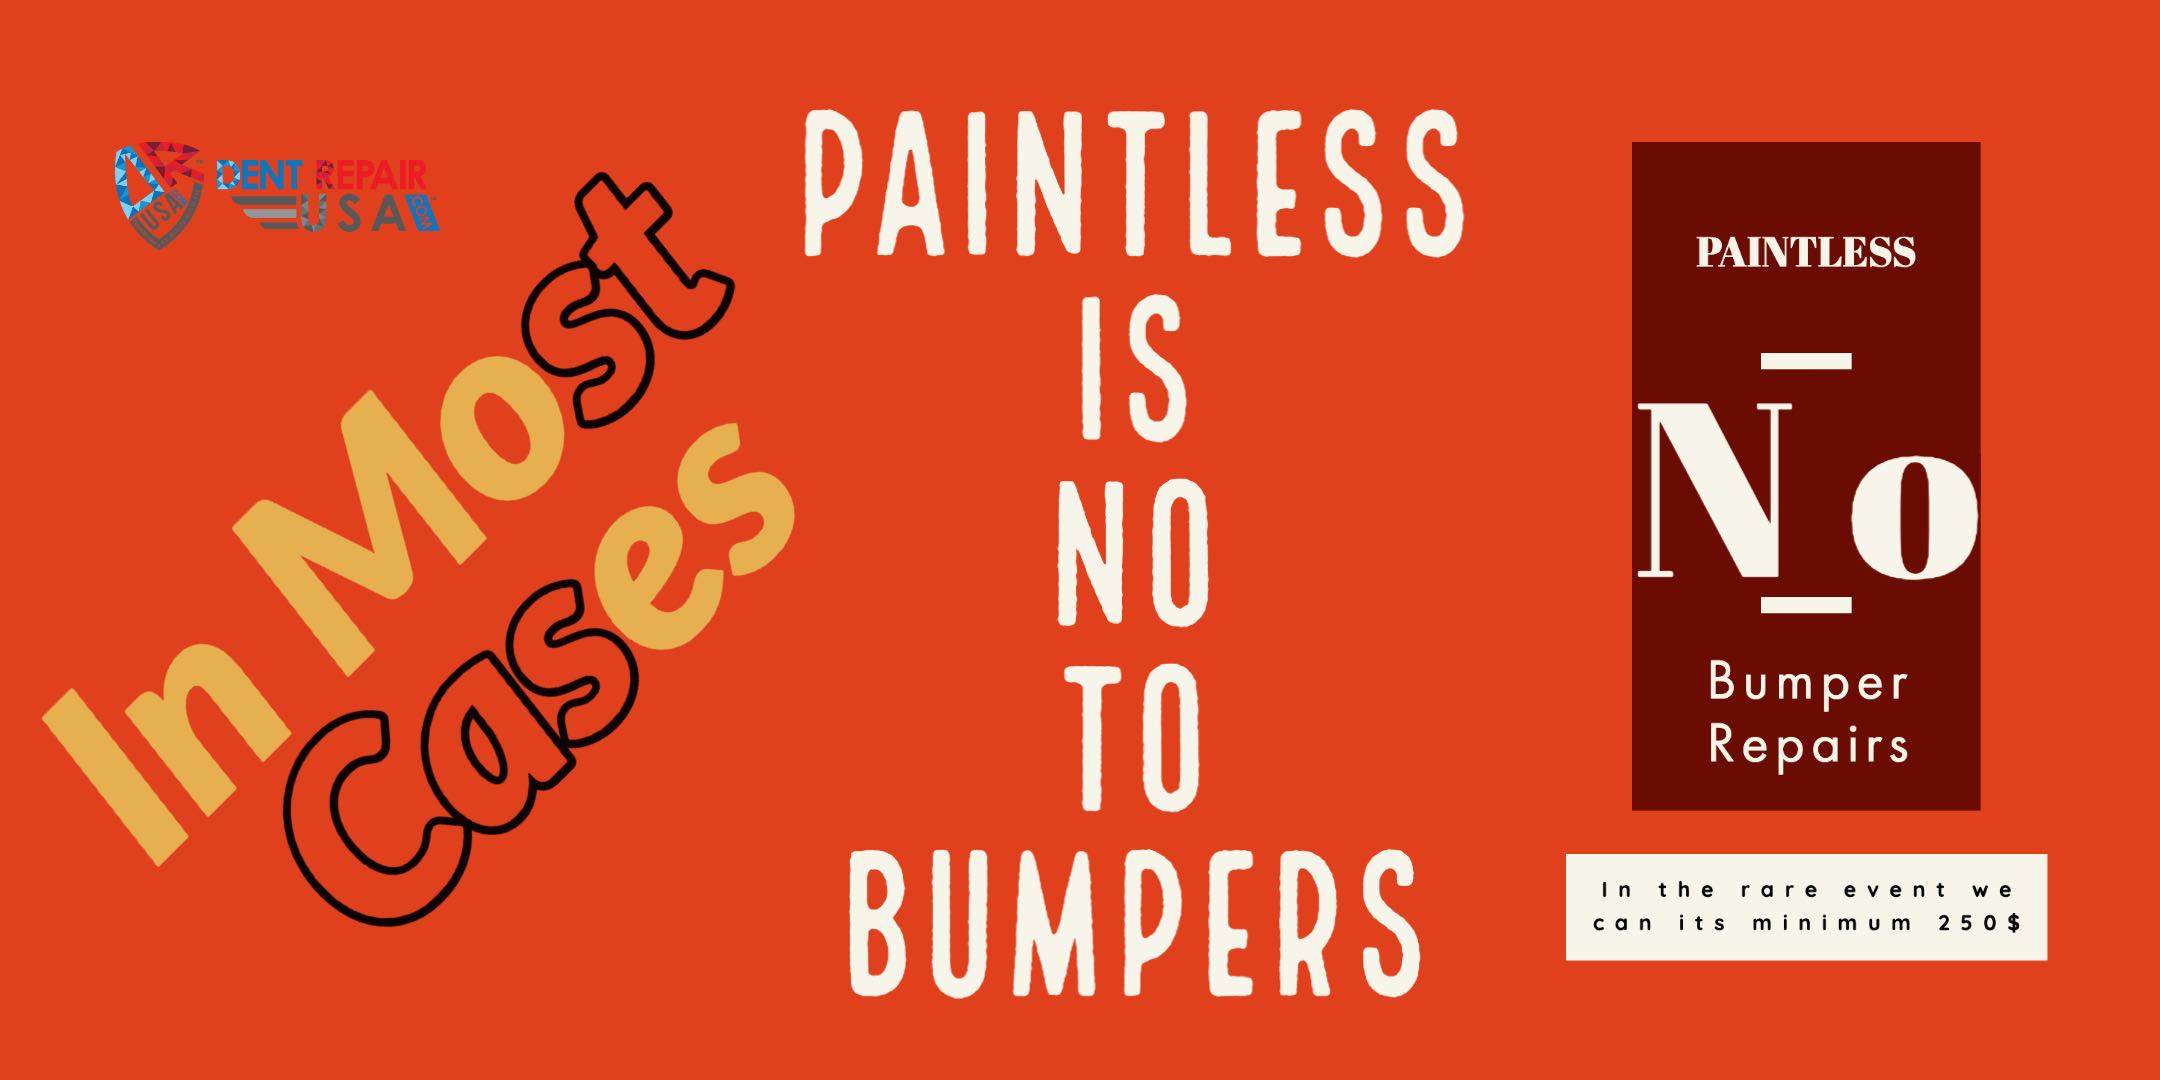 Paintless-Dent-Repair-Limitations-On-Bumpers